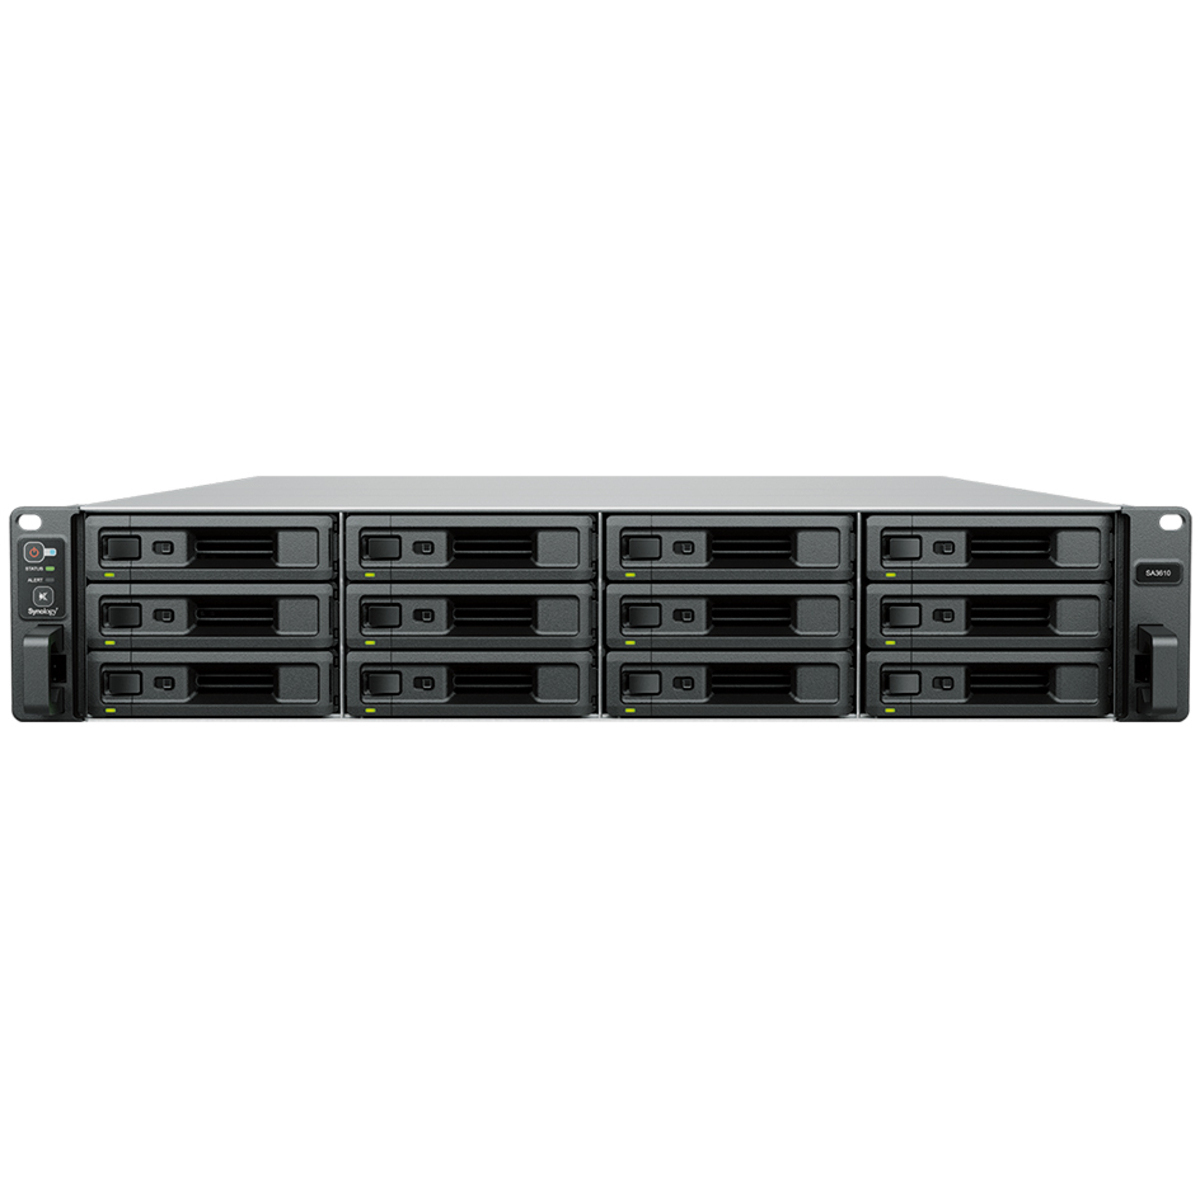 Synology RackStation SA3610 144tb 12-Bay RackMount Large Business / Enterprise NAS - Network Attached Storage Device 12x12tb Seagate IronWolf Pro ST12000NT001 3.5 7200rpm SATA 6Gb/s HDD NAS Class Drives Installed - Burn-In Tested - ON SALE RackStation SA3610